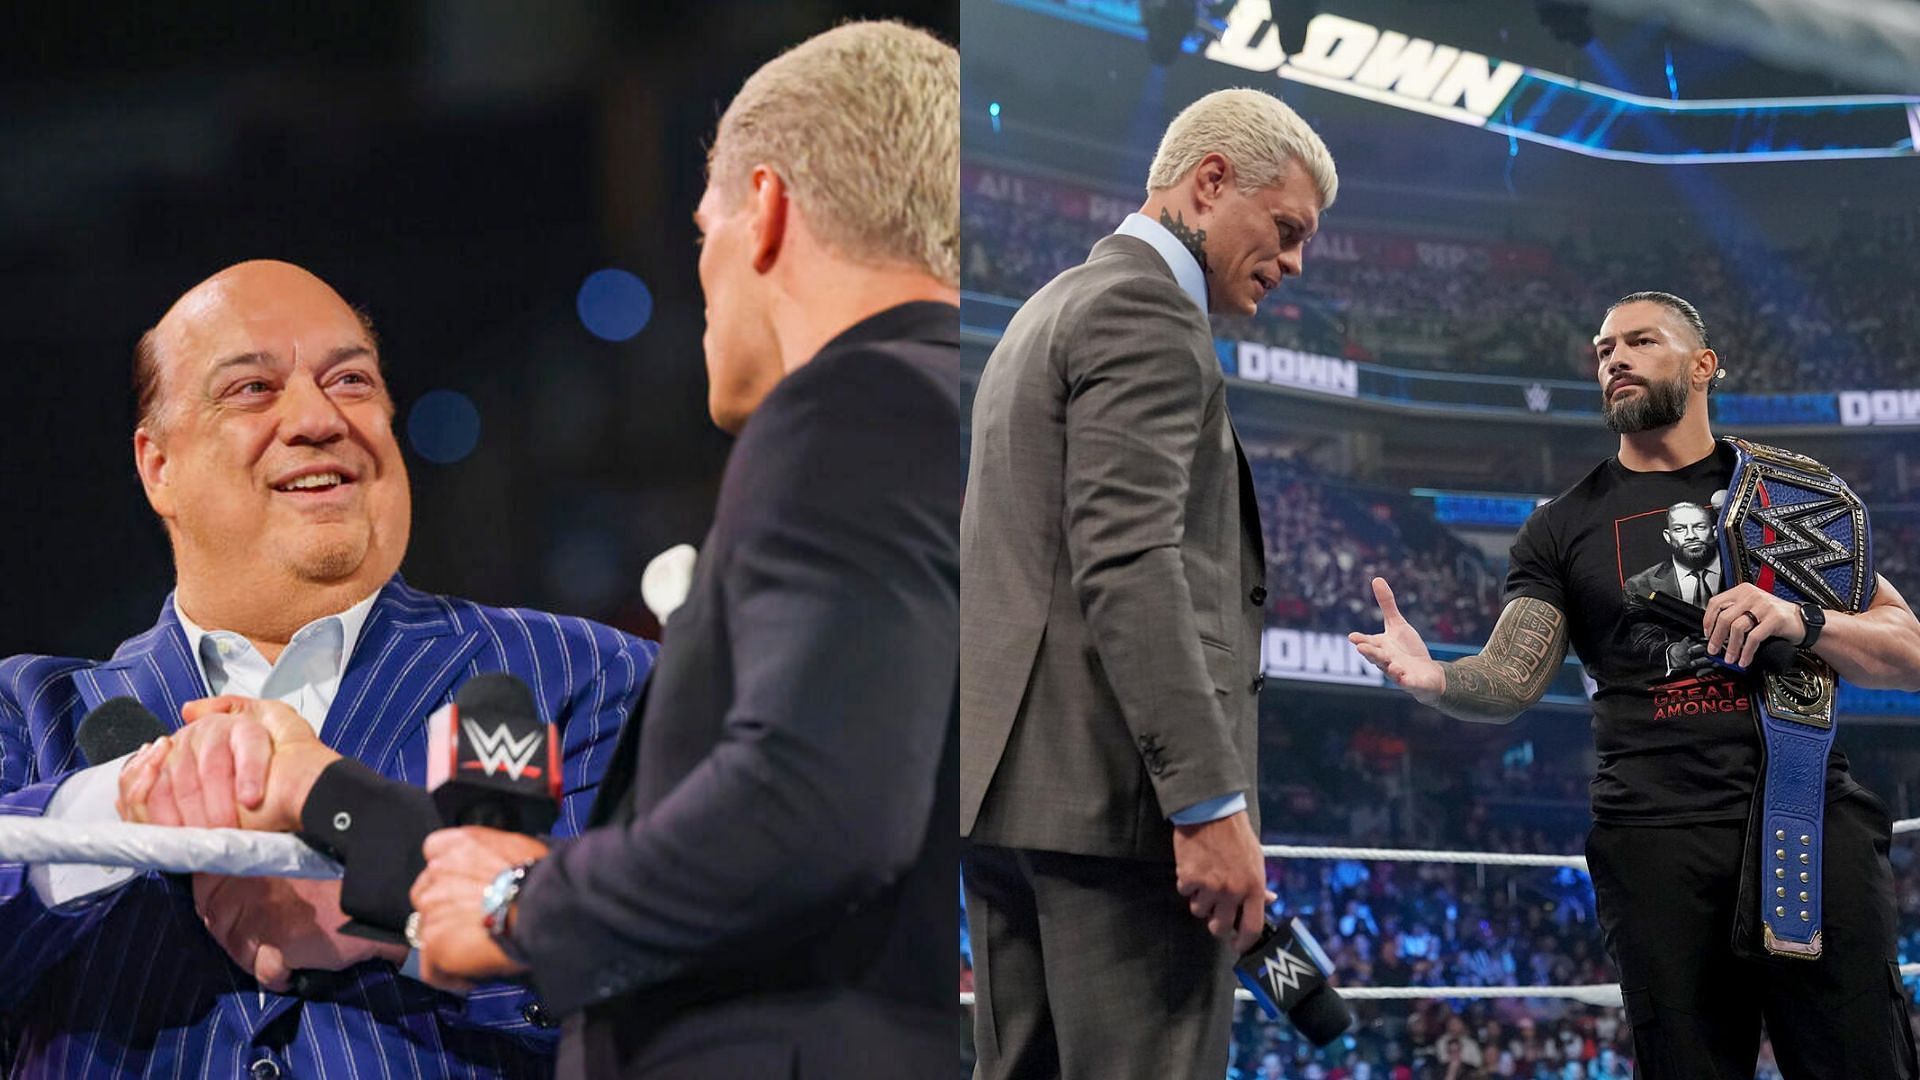 Paul Heyman made an interesting offer to Cody Rhodes ahead of SmackDown